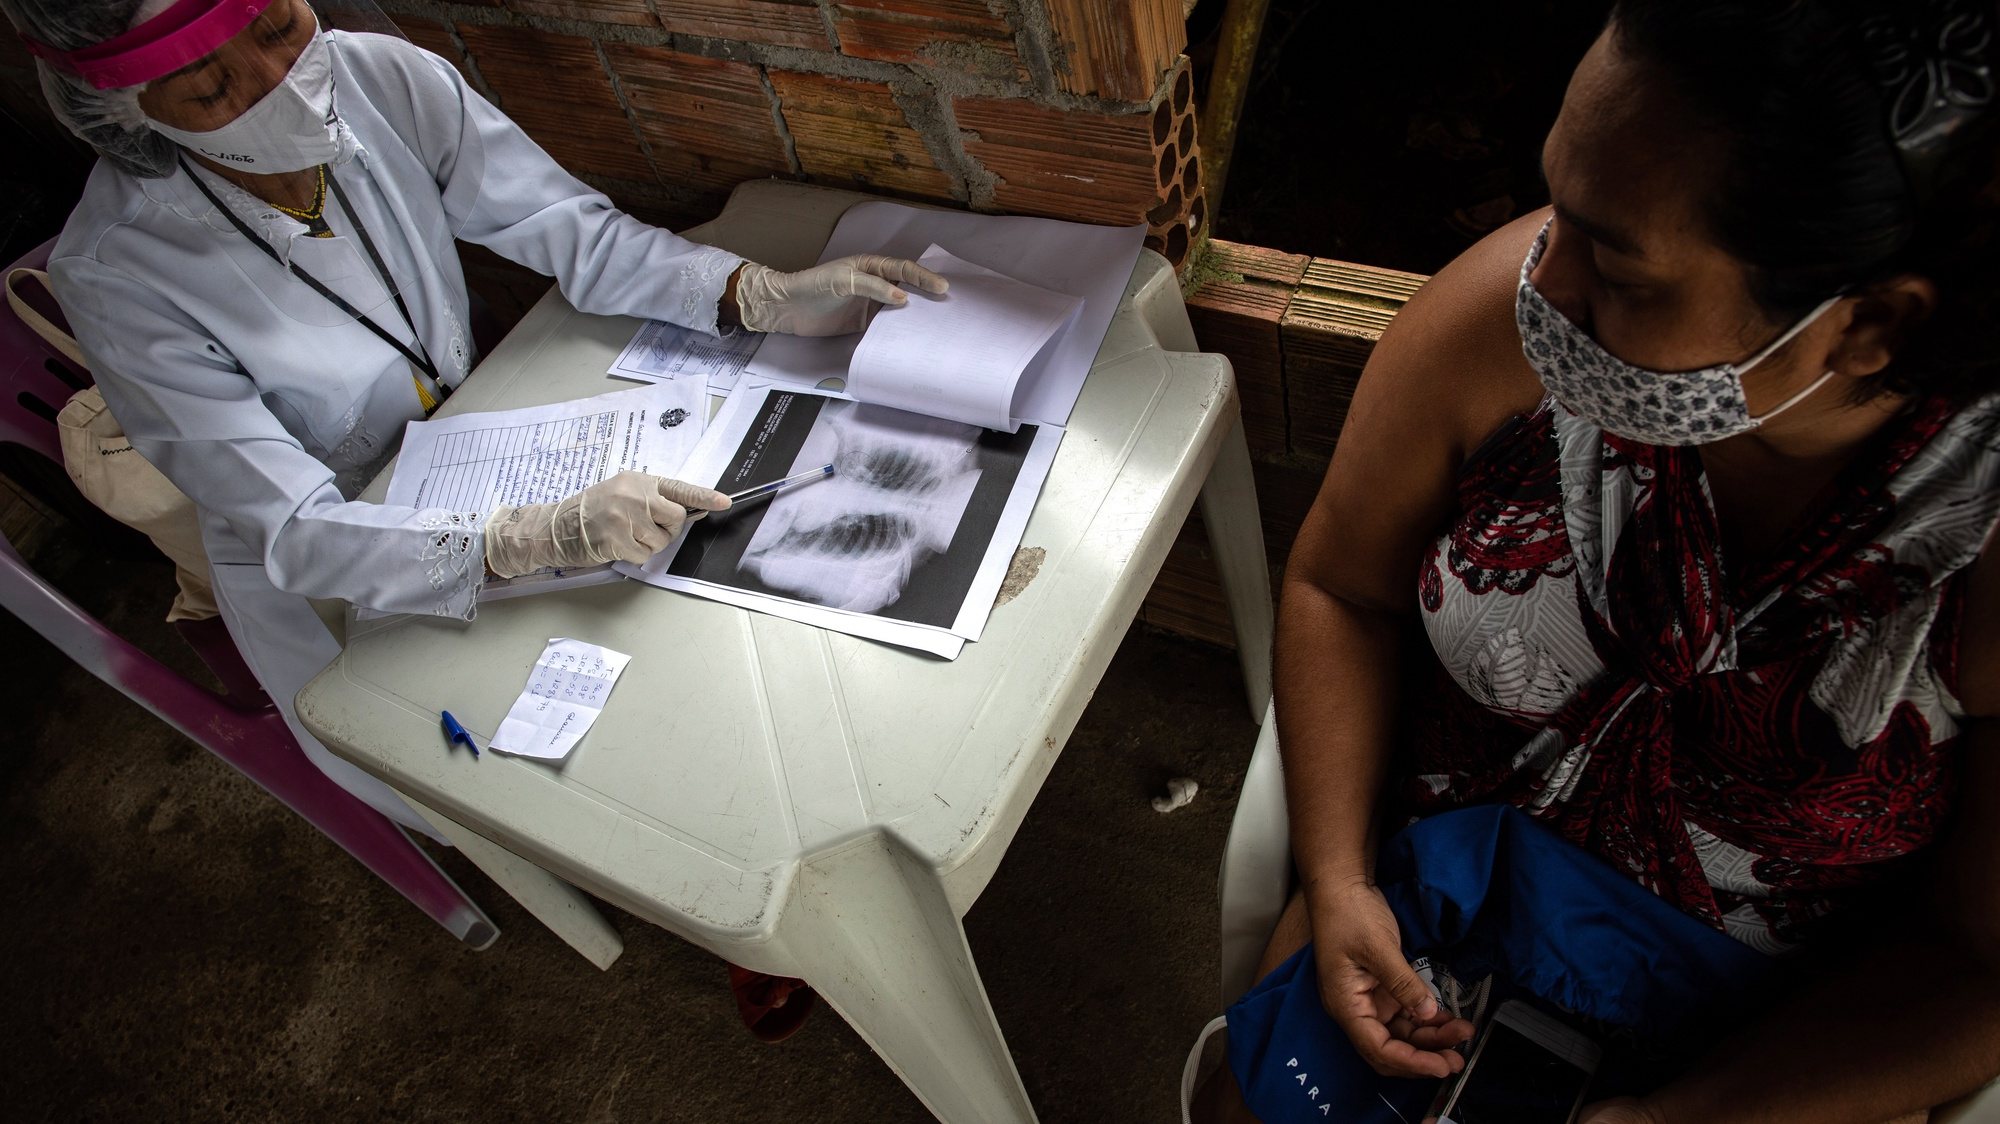 epa09007406 Nursing technician Vanda Ortega, 33, from Witoto people, reviews the lung imaging examination of the Covid-19 patient Glauciane Barbosa, 36, from the Bare people, at the Indigenous Support Unit, a field hospital built by native owners in Parque das Tribus, the only indigenous neighborhood in Manaus, Amazonas, Brazil, 11 February 2021 (issued 12 February 2021). The residents of an indigenous neighborhood in Manaus have erected a field hospital for the treatment of natives infected with the coronavirus in the midst of the oxygen lack crisis and the health collapse in the state.  EPA/RAPHAEL ALVES